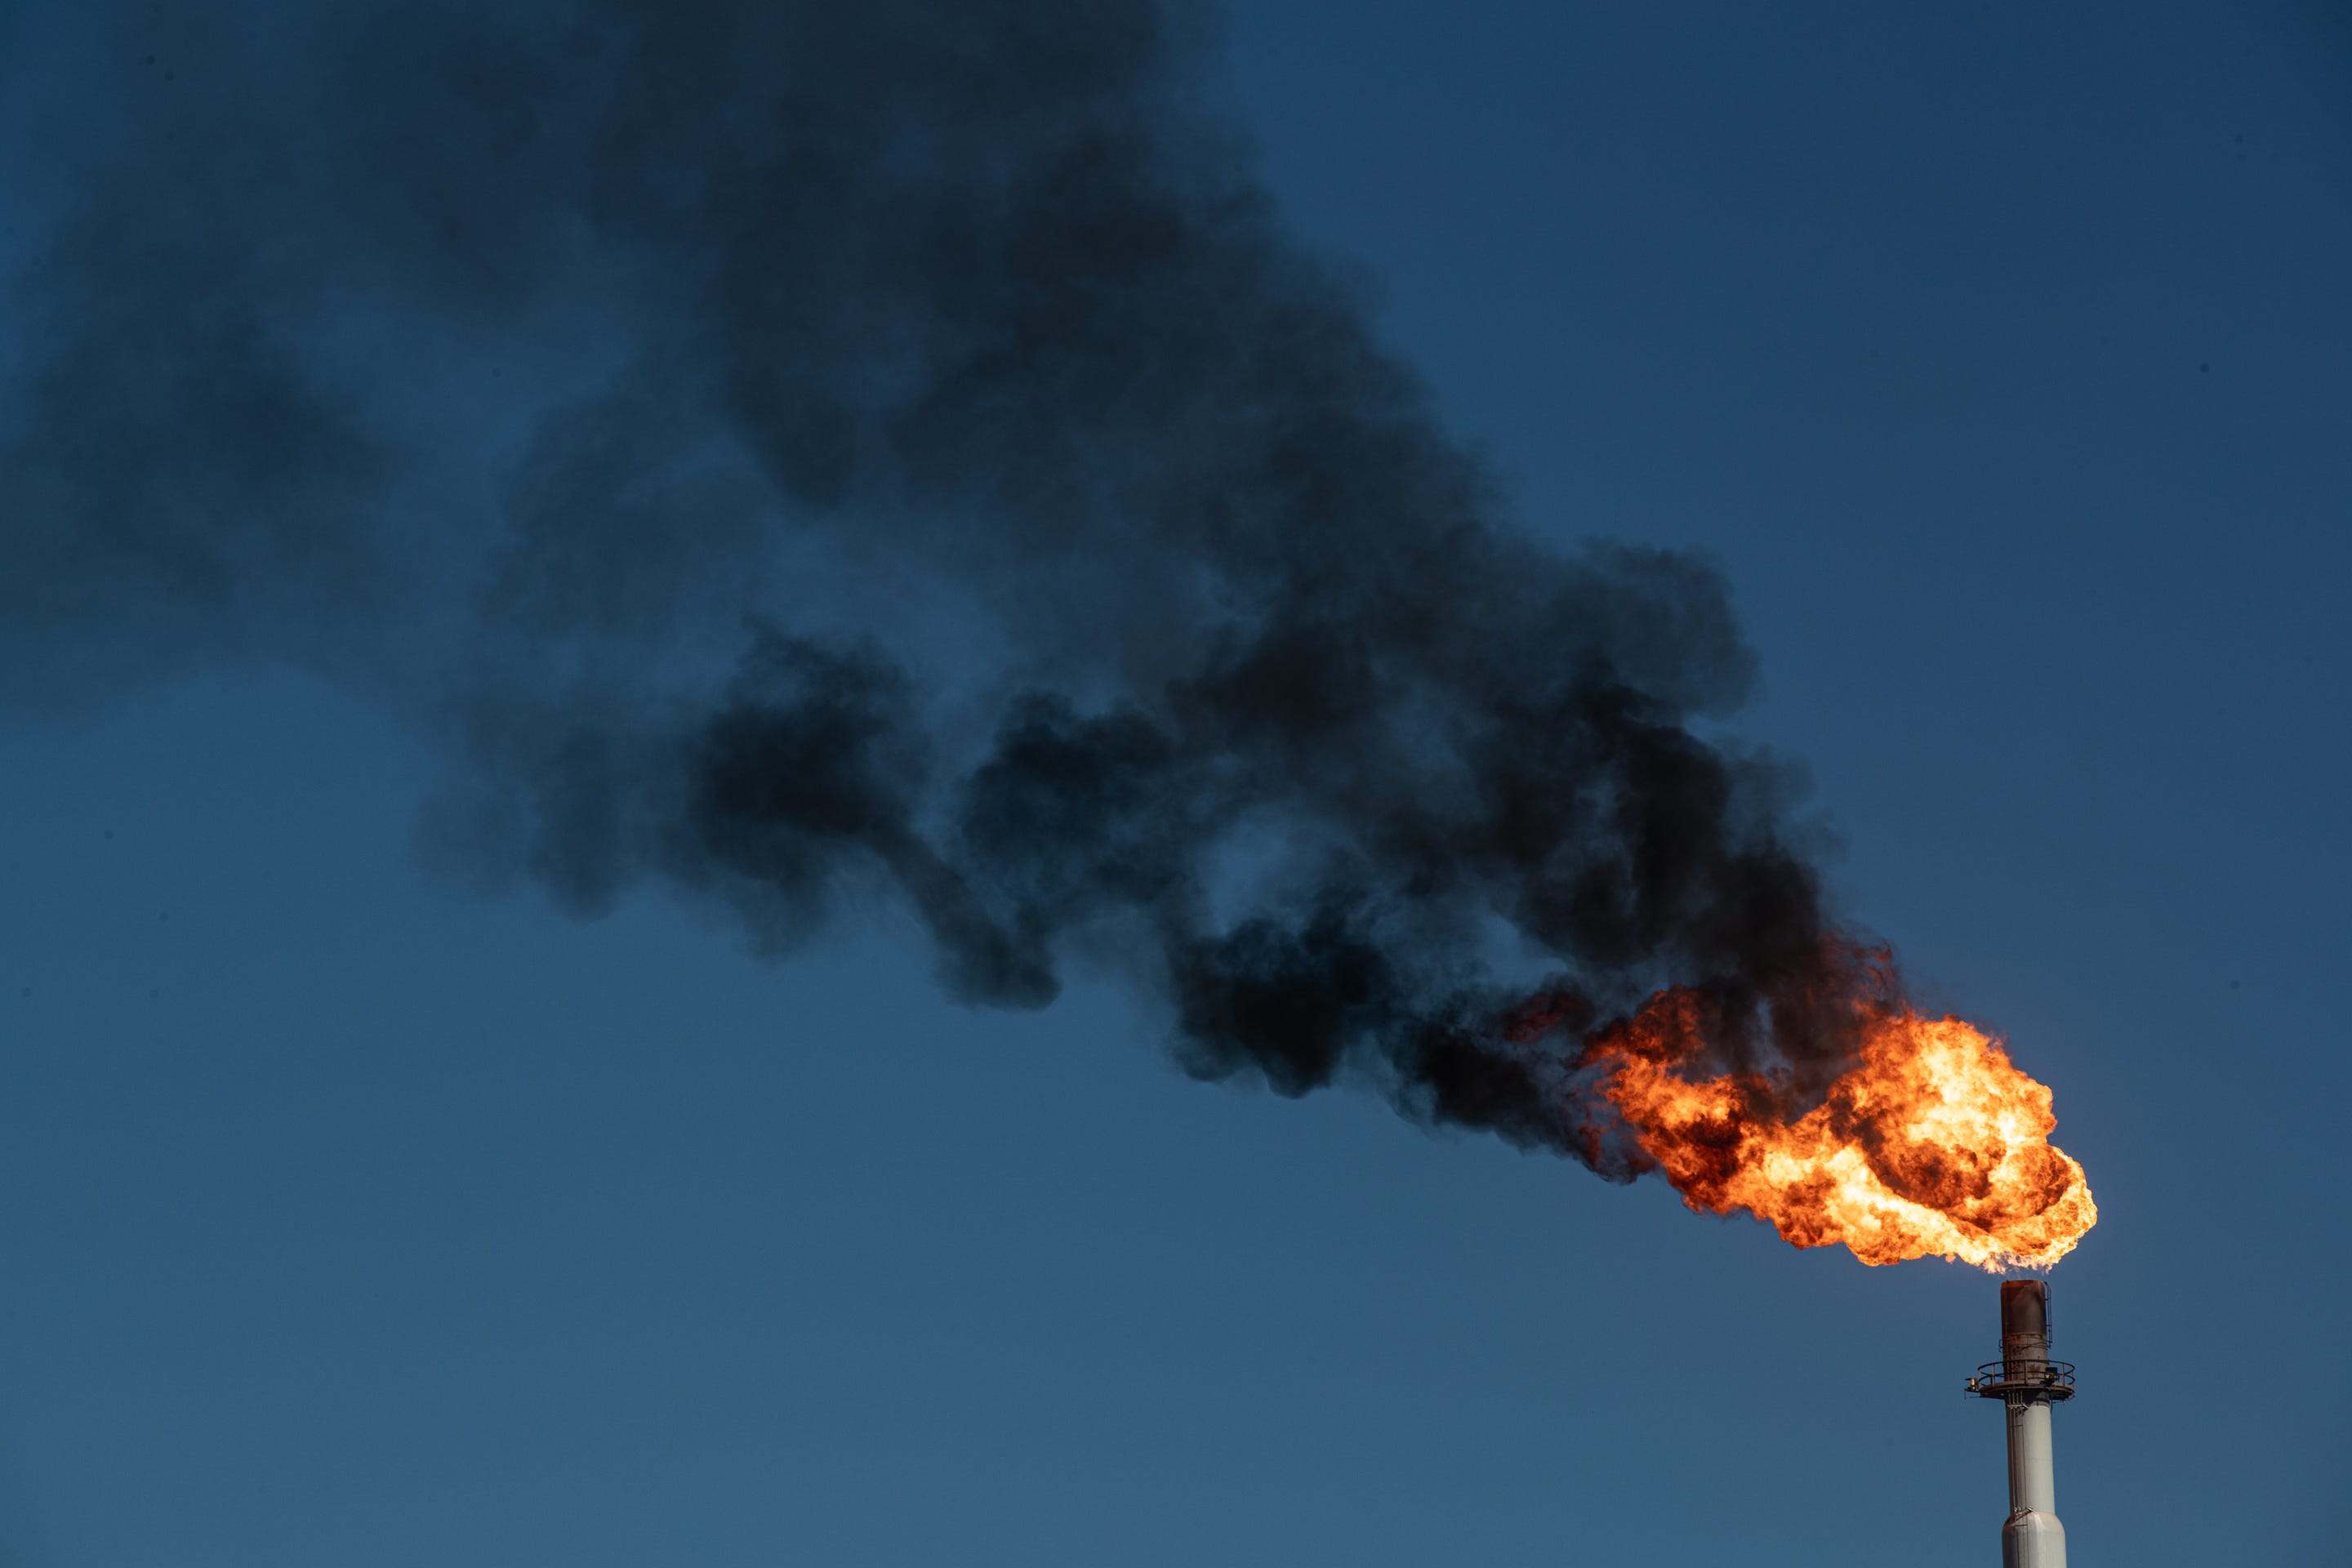 A flare, or emissions event, at the Javelina gas facility that abuts Dona Park is seen from the neighborhood in Corpus Christi, Texas, on March 16, 2022.